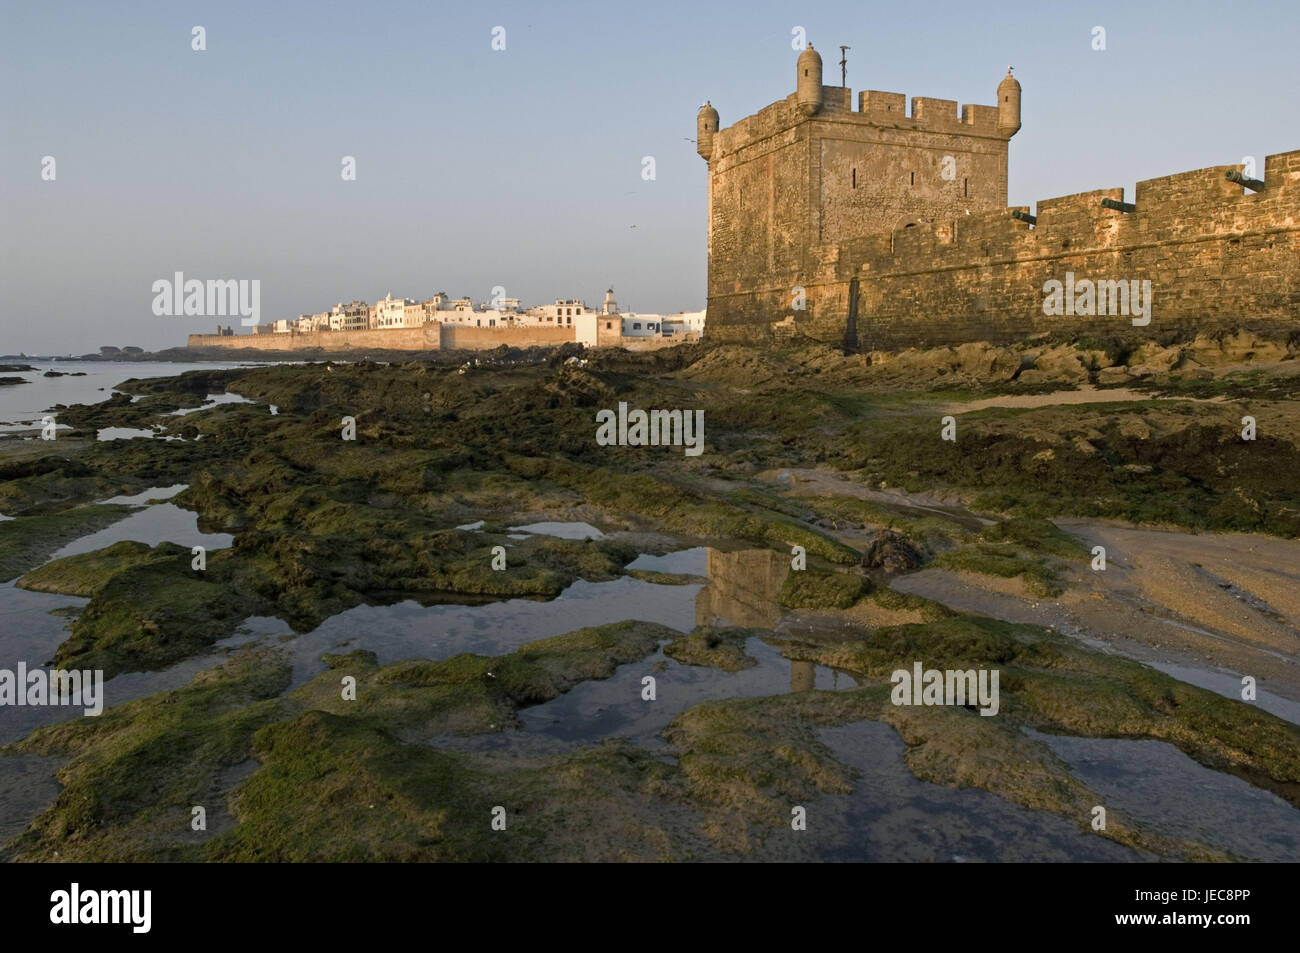 Morocco, Essaouira, city wall, background, Medina, sea, low tide, algae, Africa, town, port, fishing town, tourism, destination, place of interest, defensive wall, architecture, Old Town, historically, UNESCO-world cultural heritage, outside, deserted, tides, Stock Photo